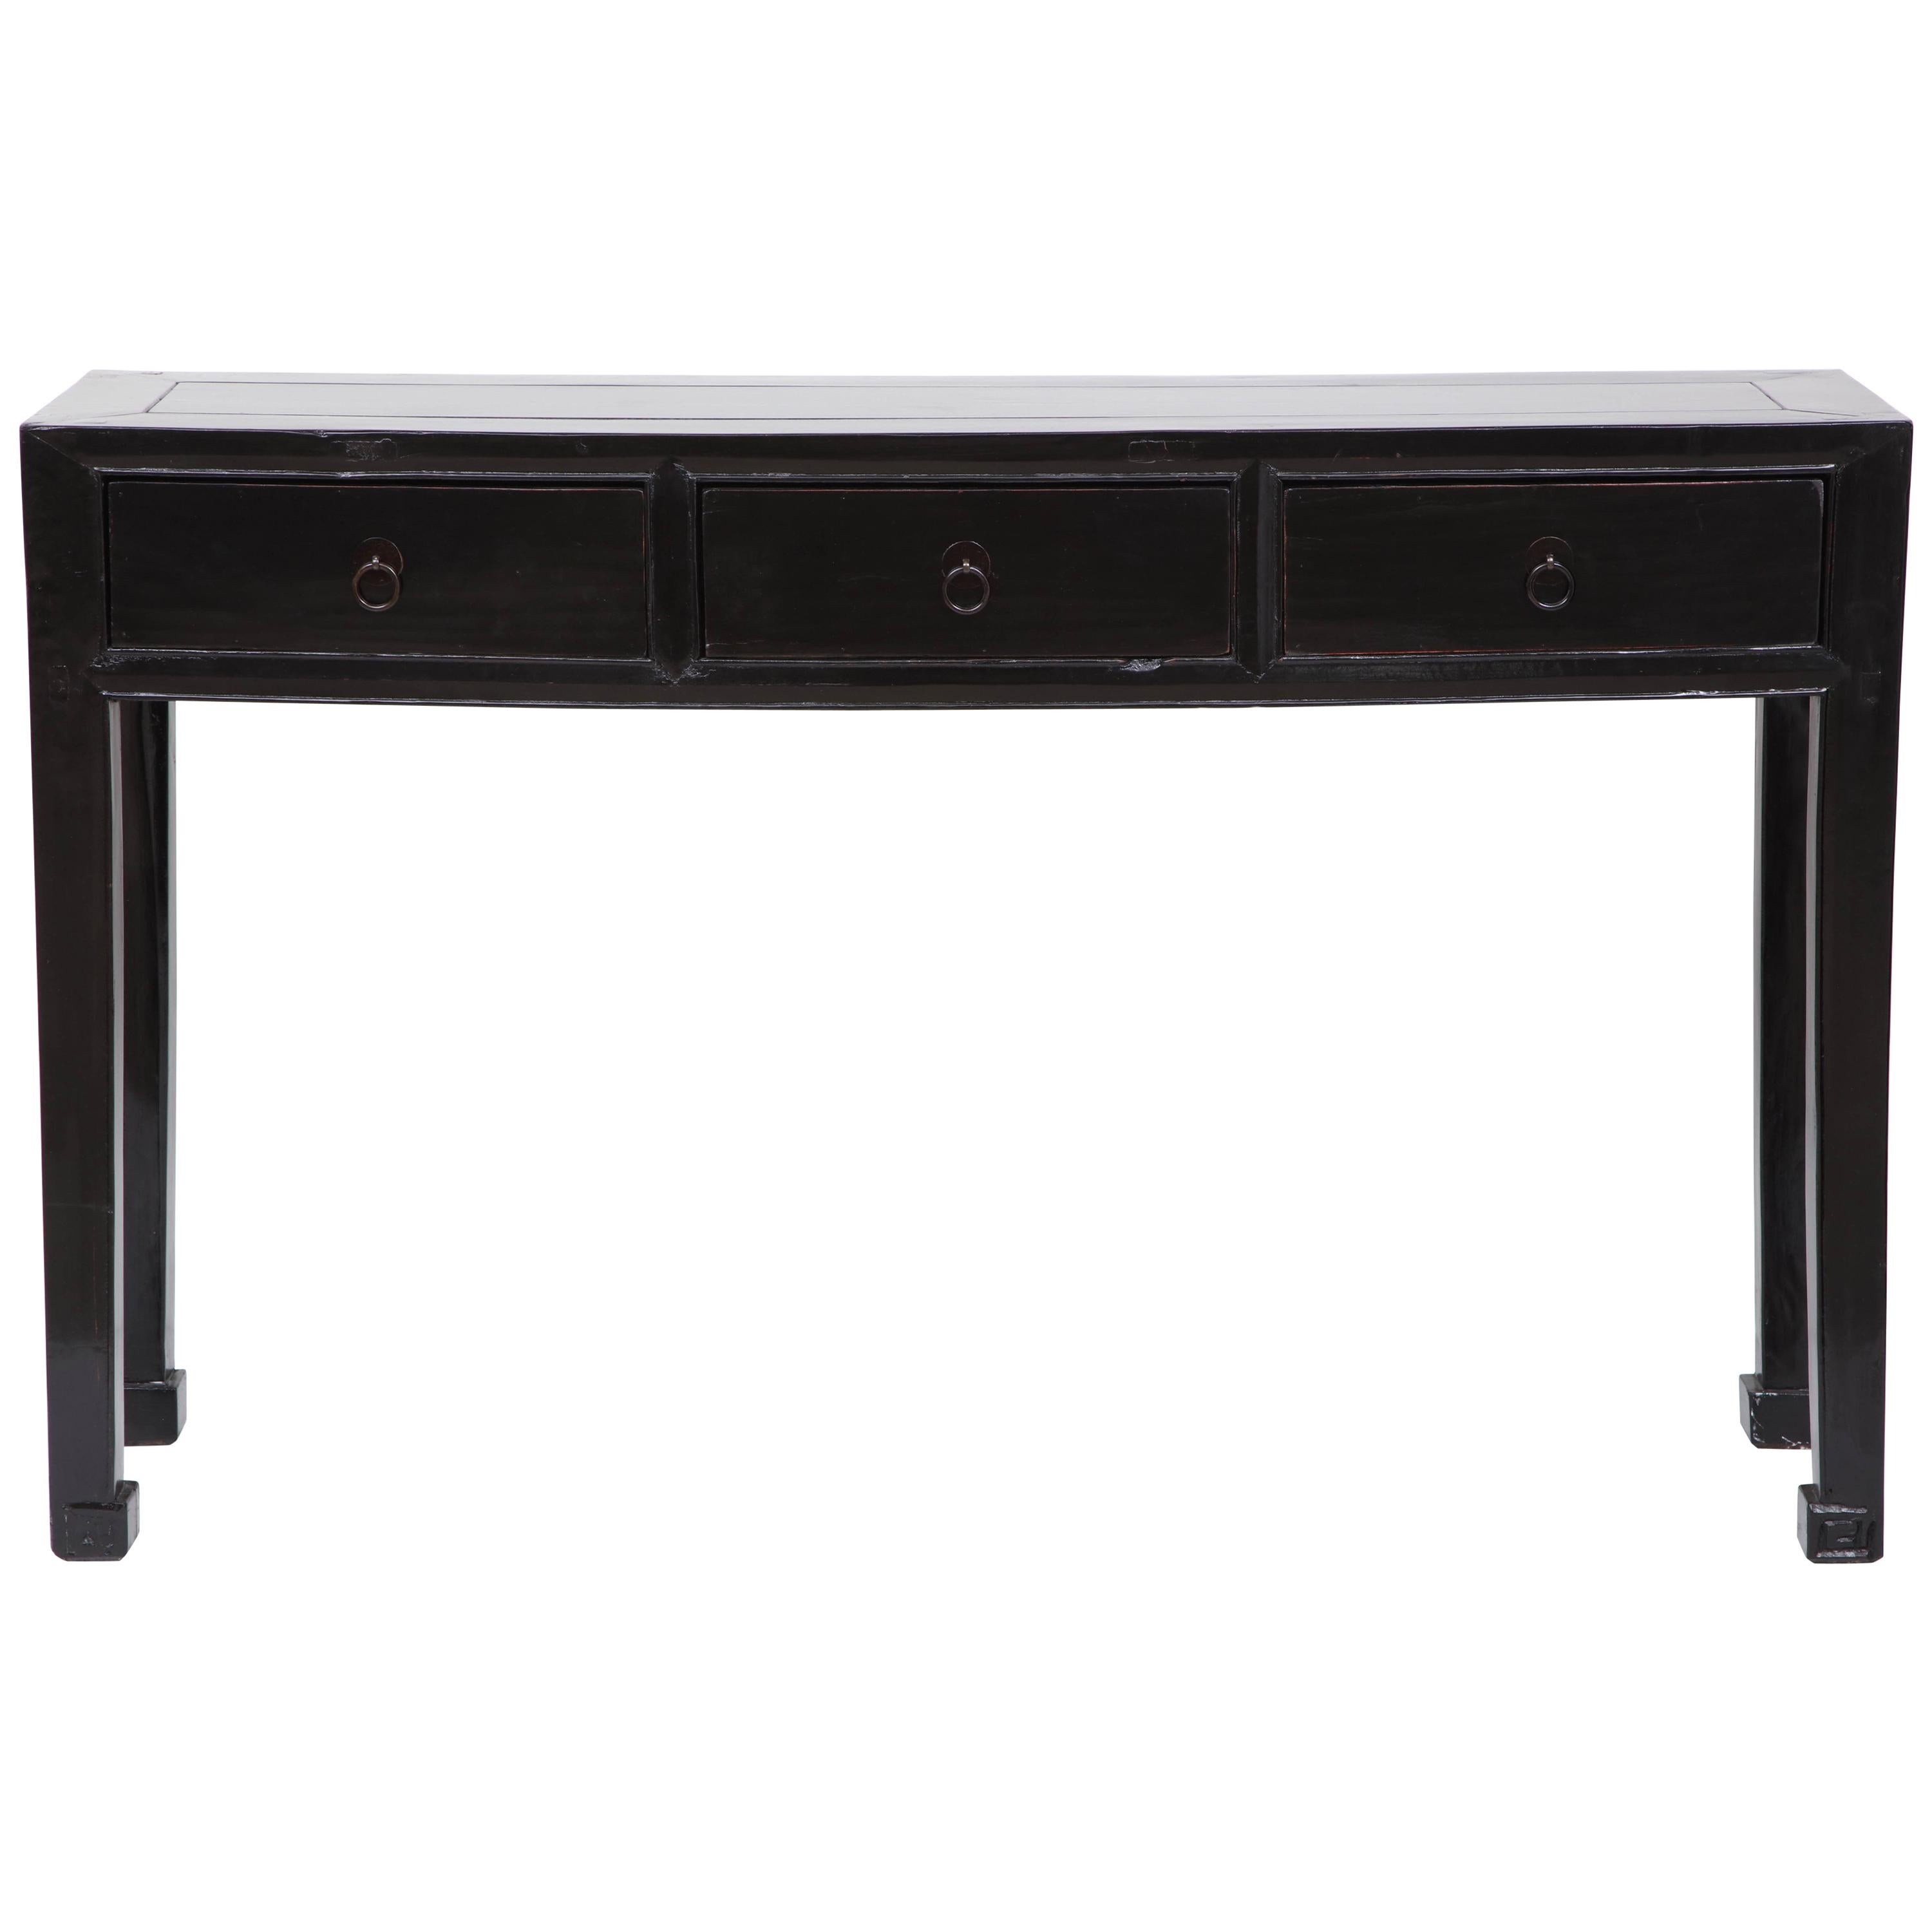 Chinese Black Lacquered Console, circa 1920s at 1stDibs